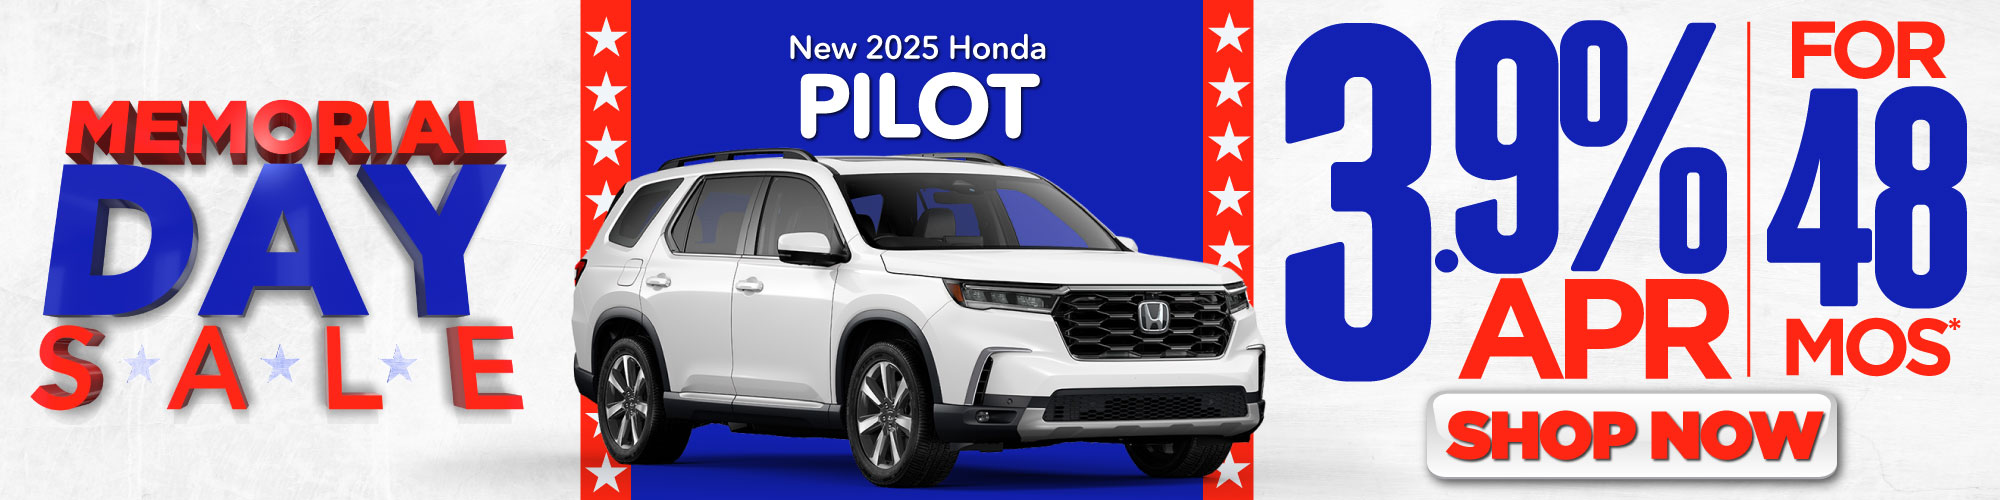 New 2022 Honda CR-V | As Low as 2.9% APR Available | Act Now